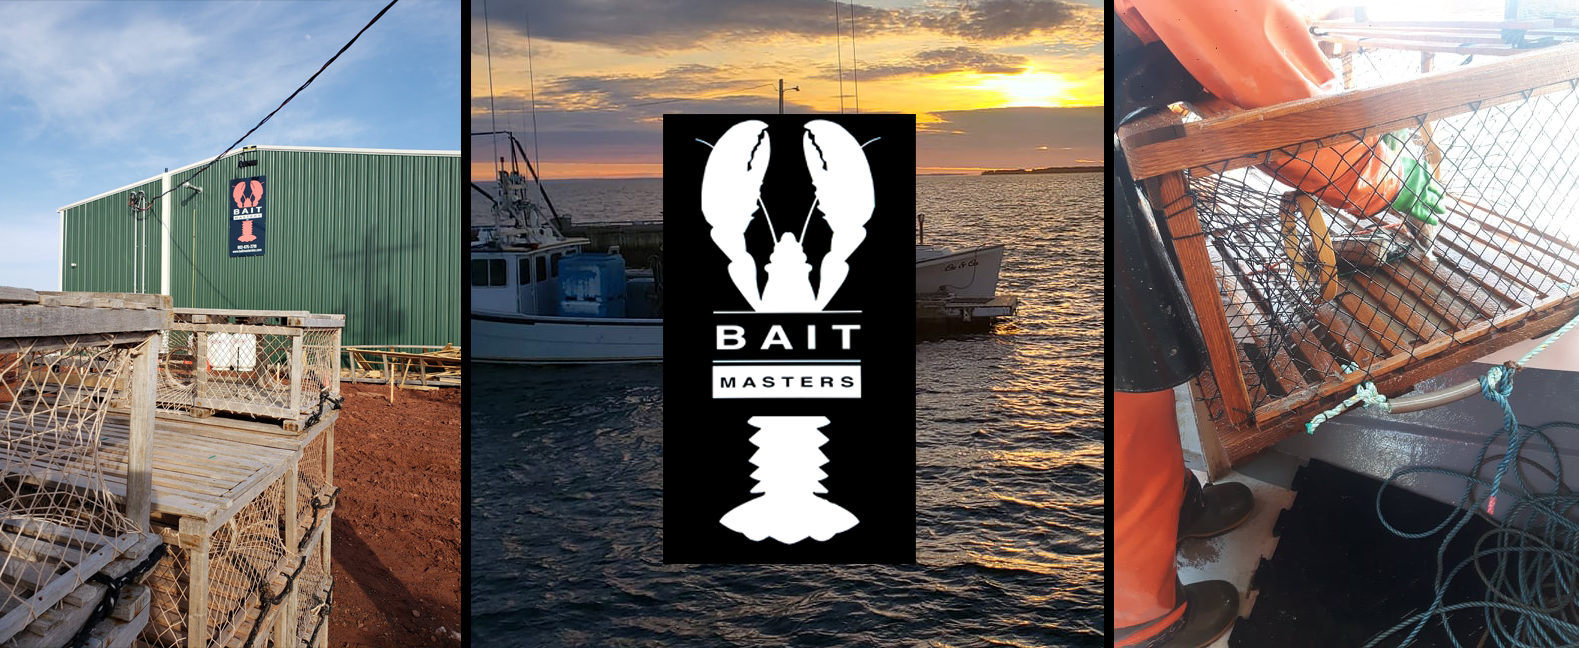 Bait Masters Inc. – An Atlantic Canada business producing and distributing  bait for the lobster and crab fishing industry